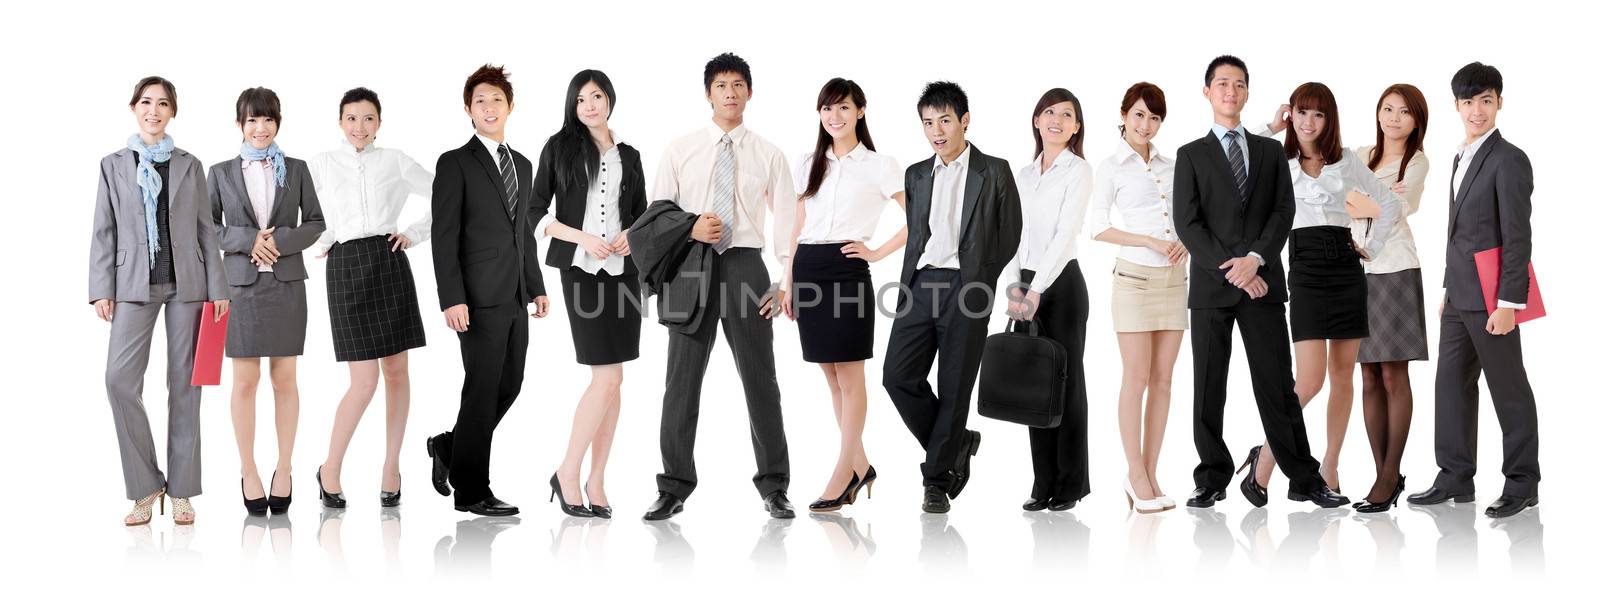 Asian business team, businesswomen and businessmen in group standing and looking at you, isolated on white background.